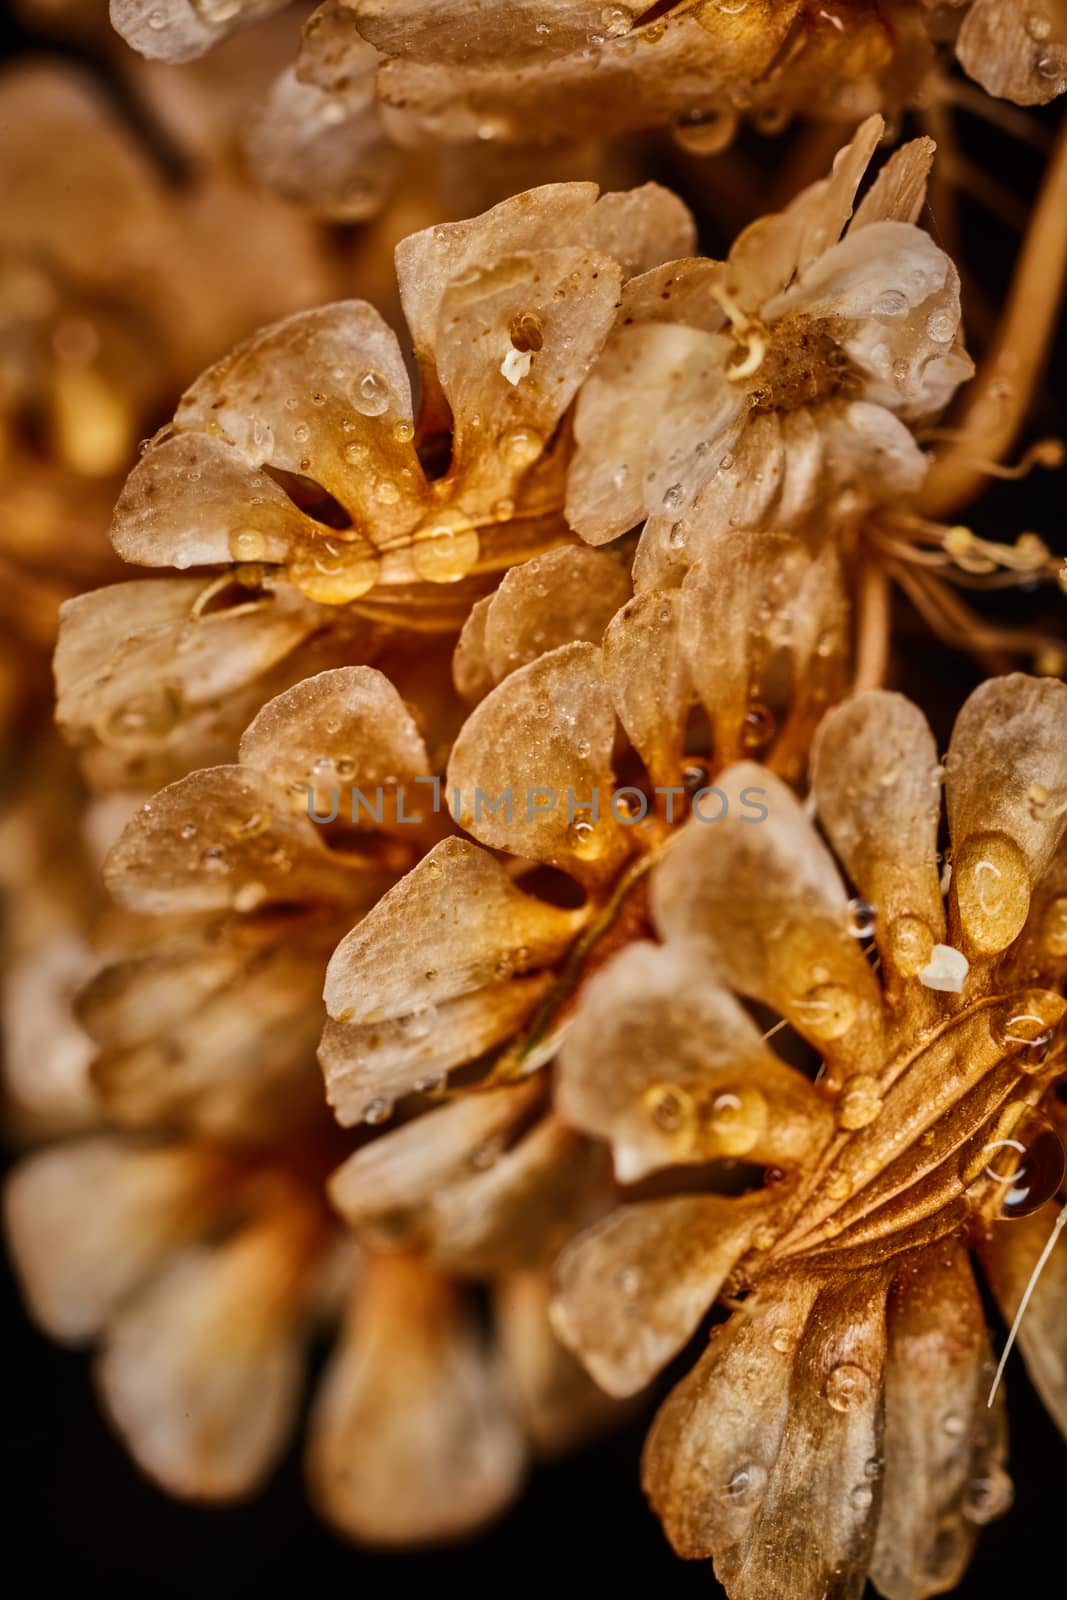 Dry plant dramatic macro close up view with raindrops